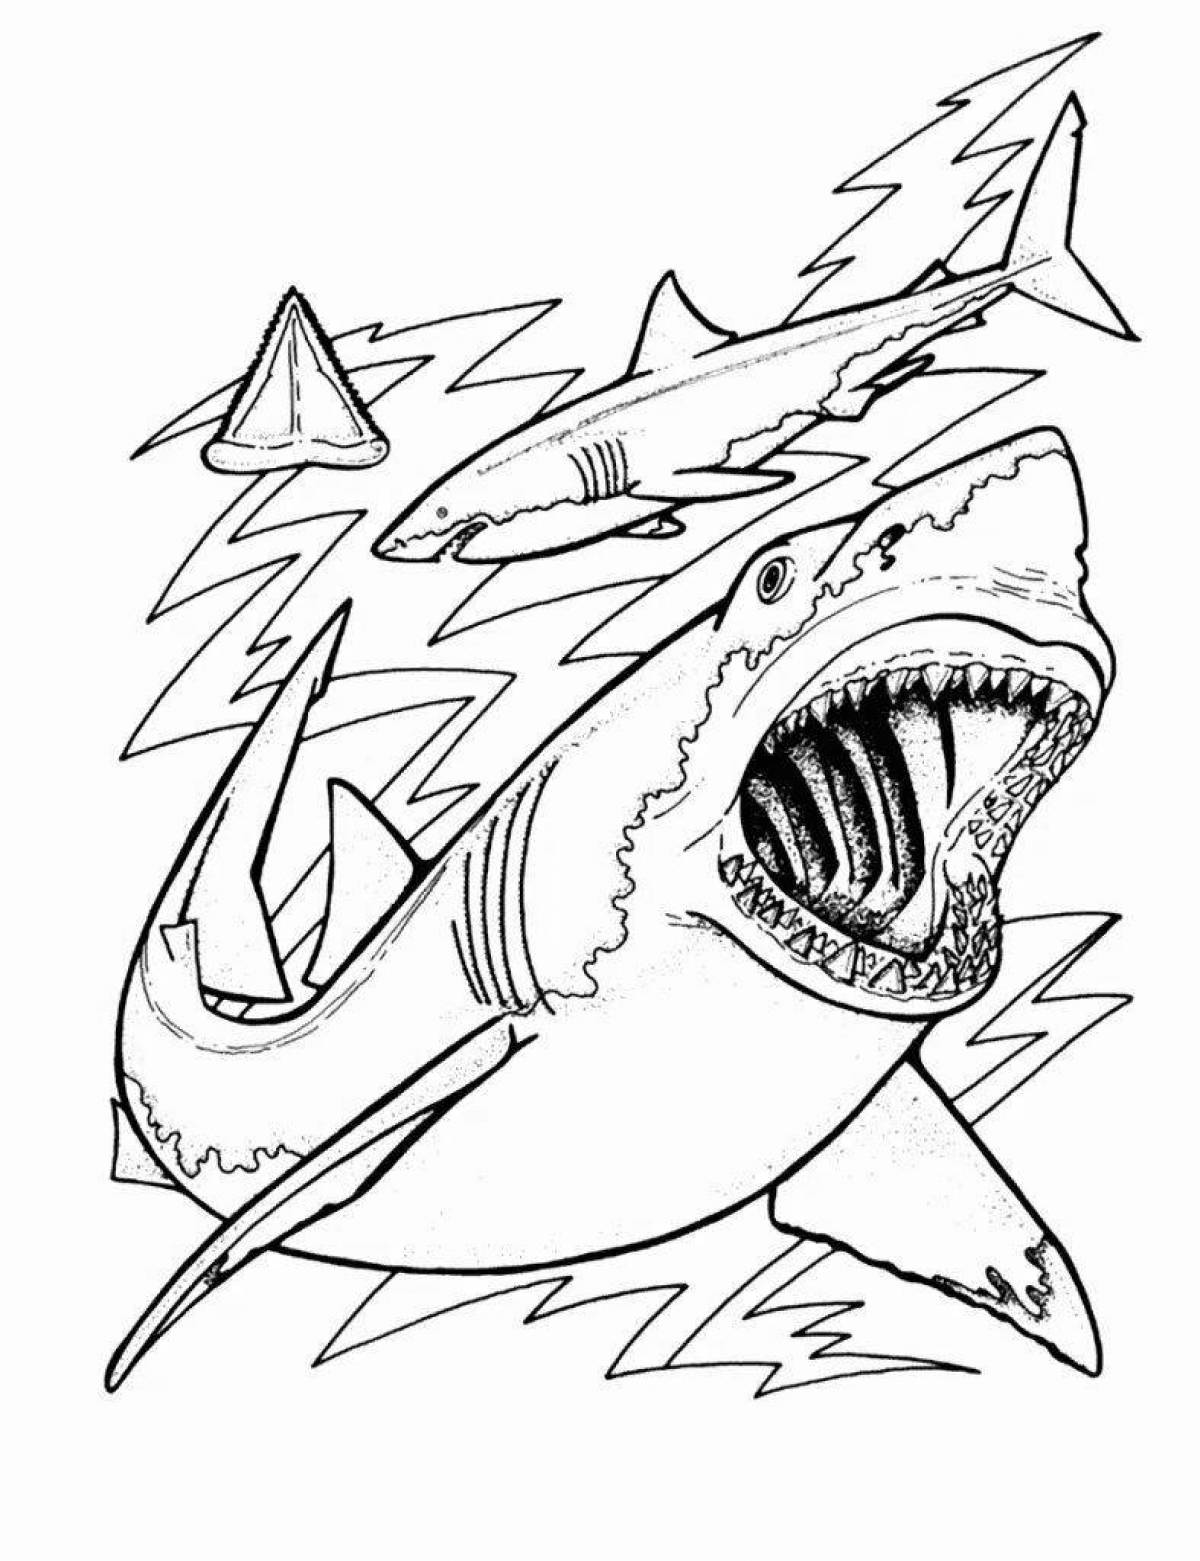 Megalodon coloring book for kids